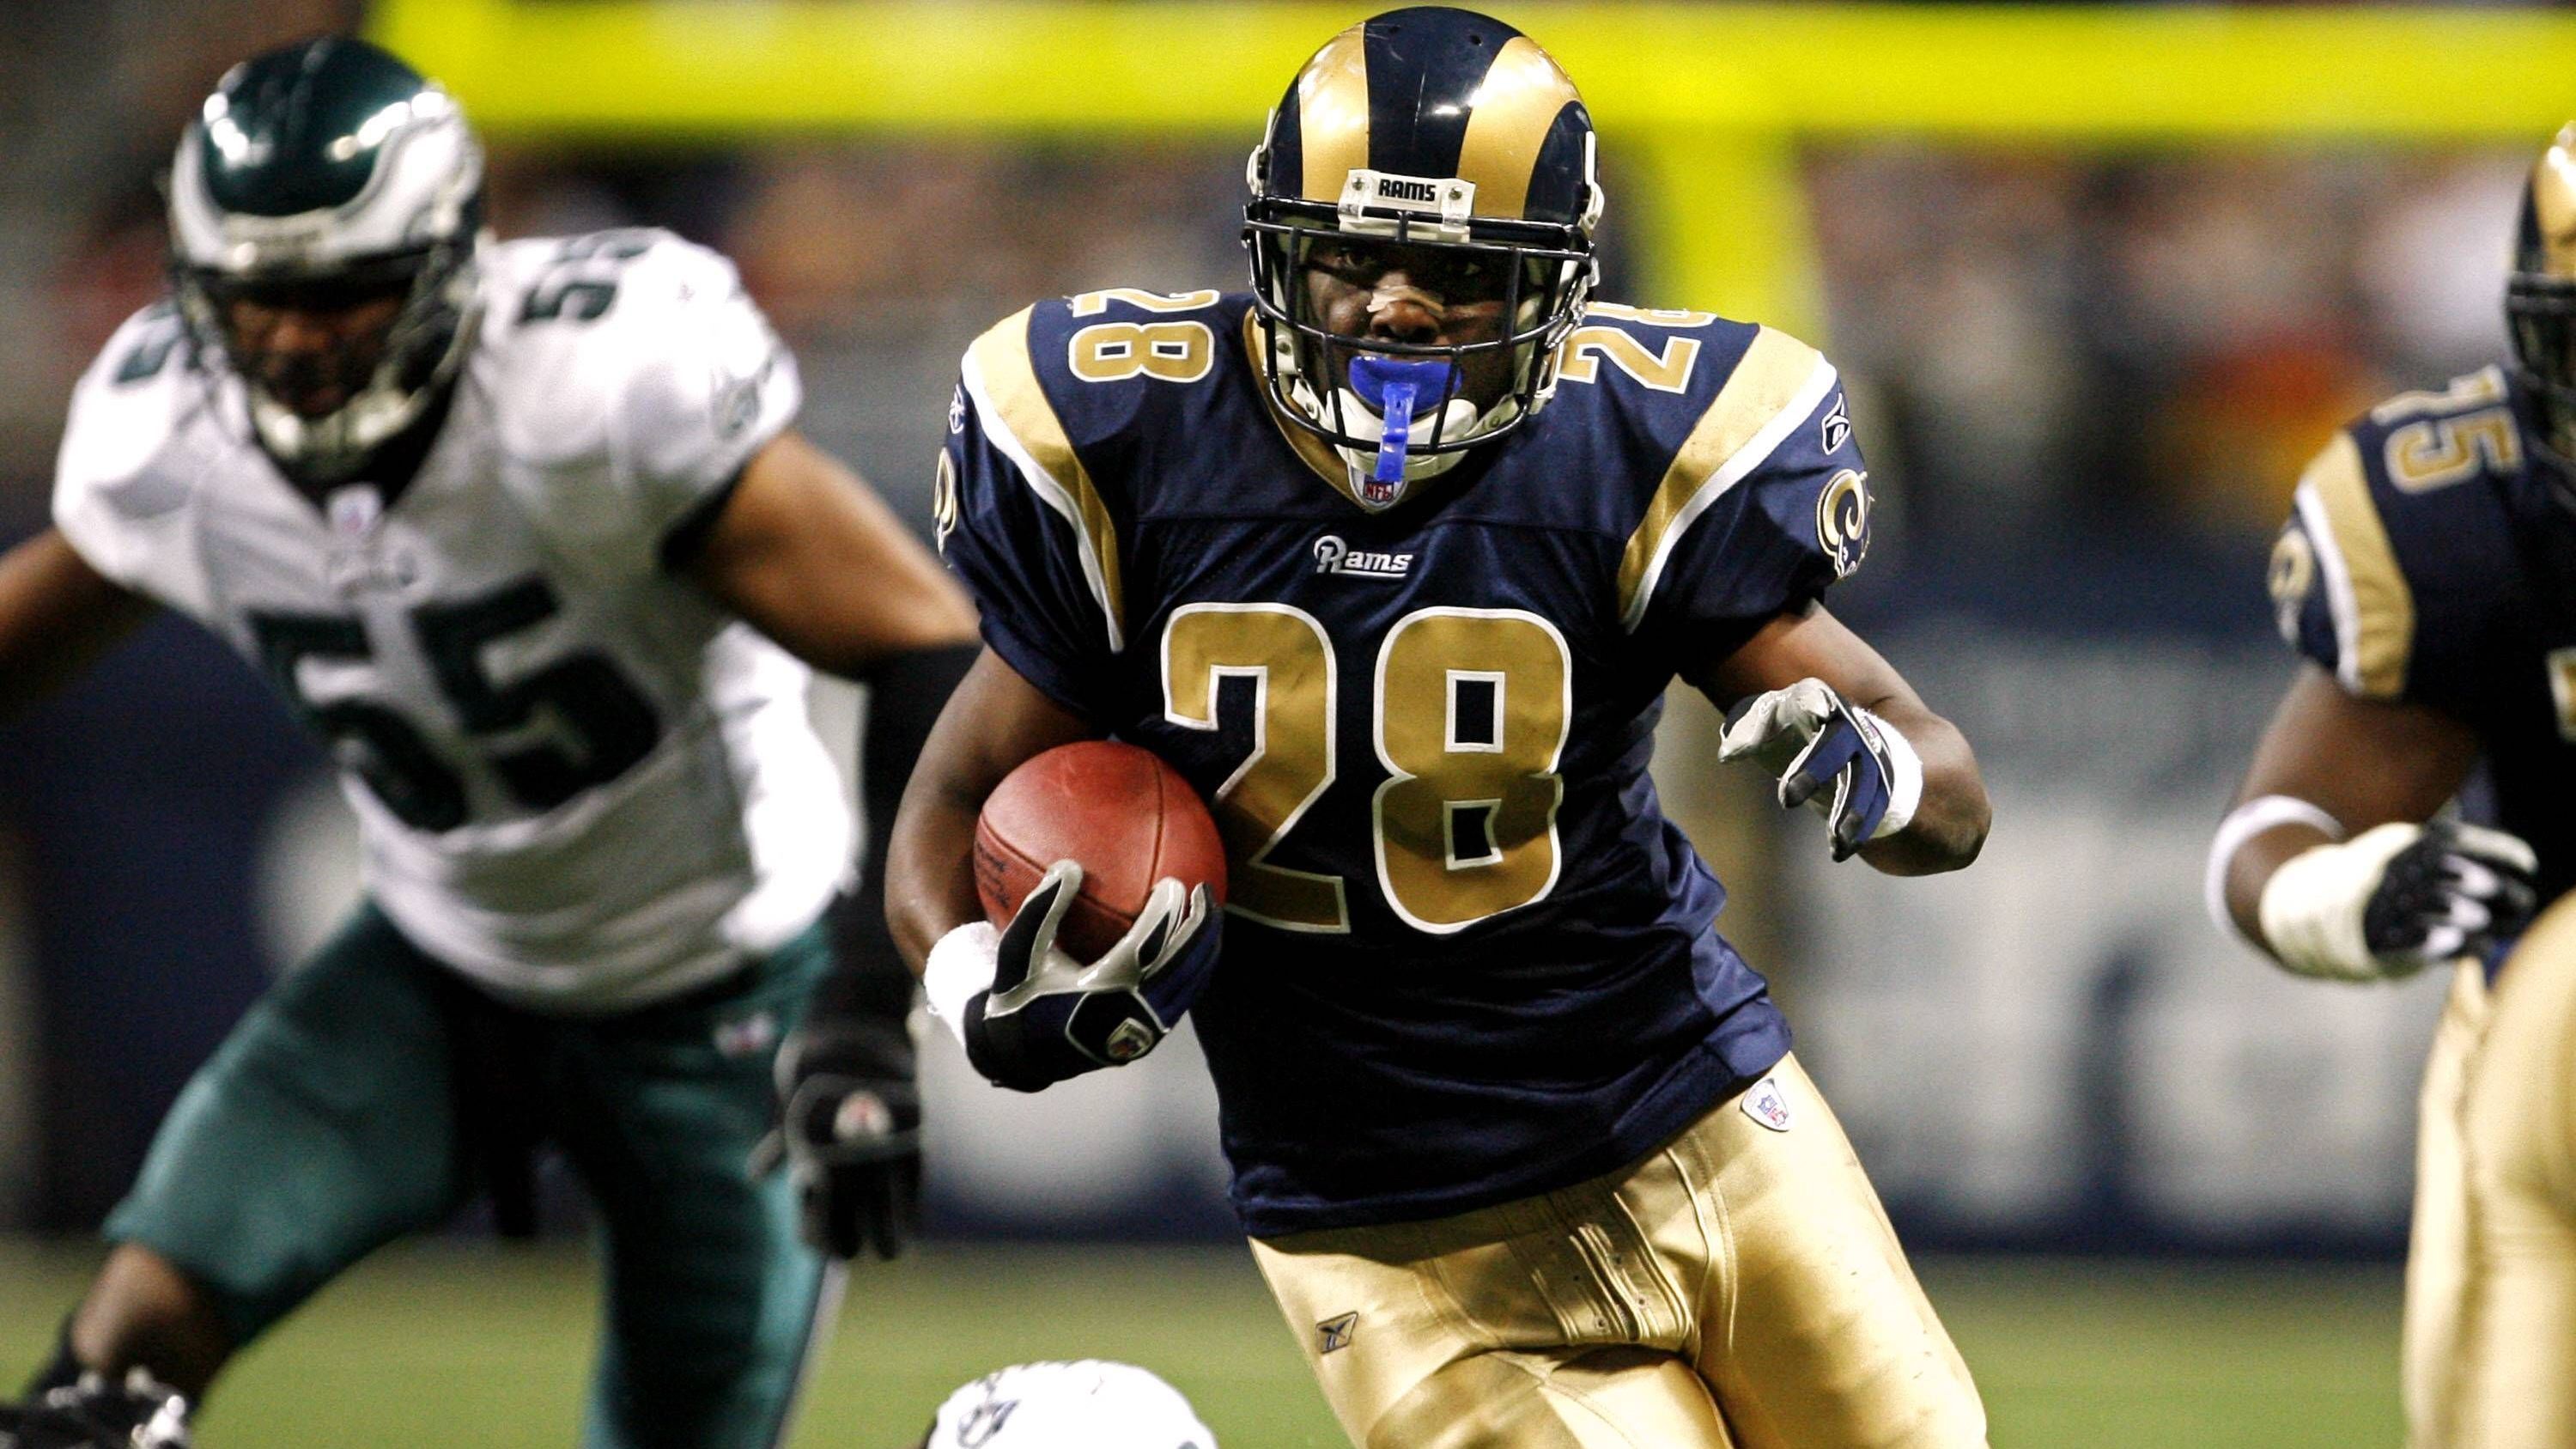 <strong>28: Marshall Faulk</strong><br>Teams: Indianapolis Colts, St. Louis Rams<br> <strong></strong>Position: Running Back<br>Erfolge: Pro Football Hall of Famer, Super-Bowl-Champion 2000, 2000 NFL MVP<br>Honorable Mentions: Darrell Green, Adrian Peterson, Curtis Martin